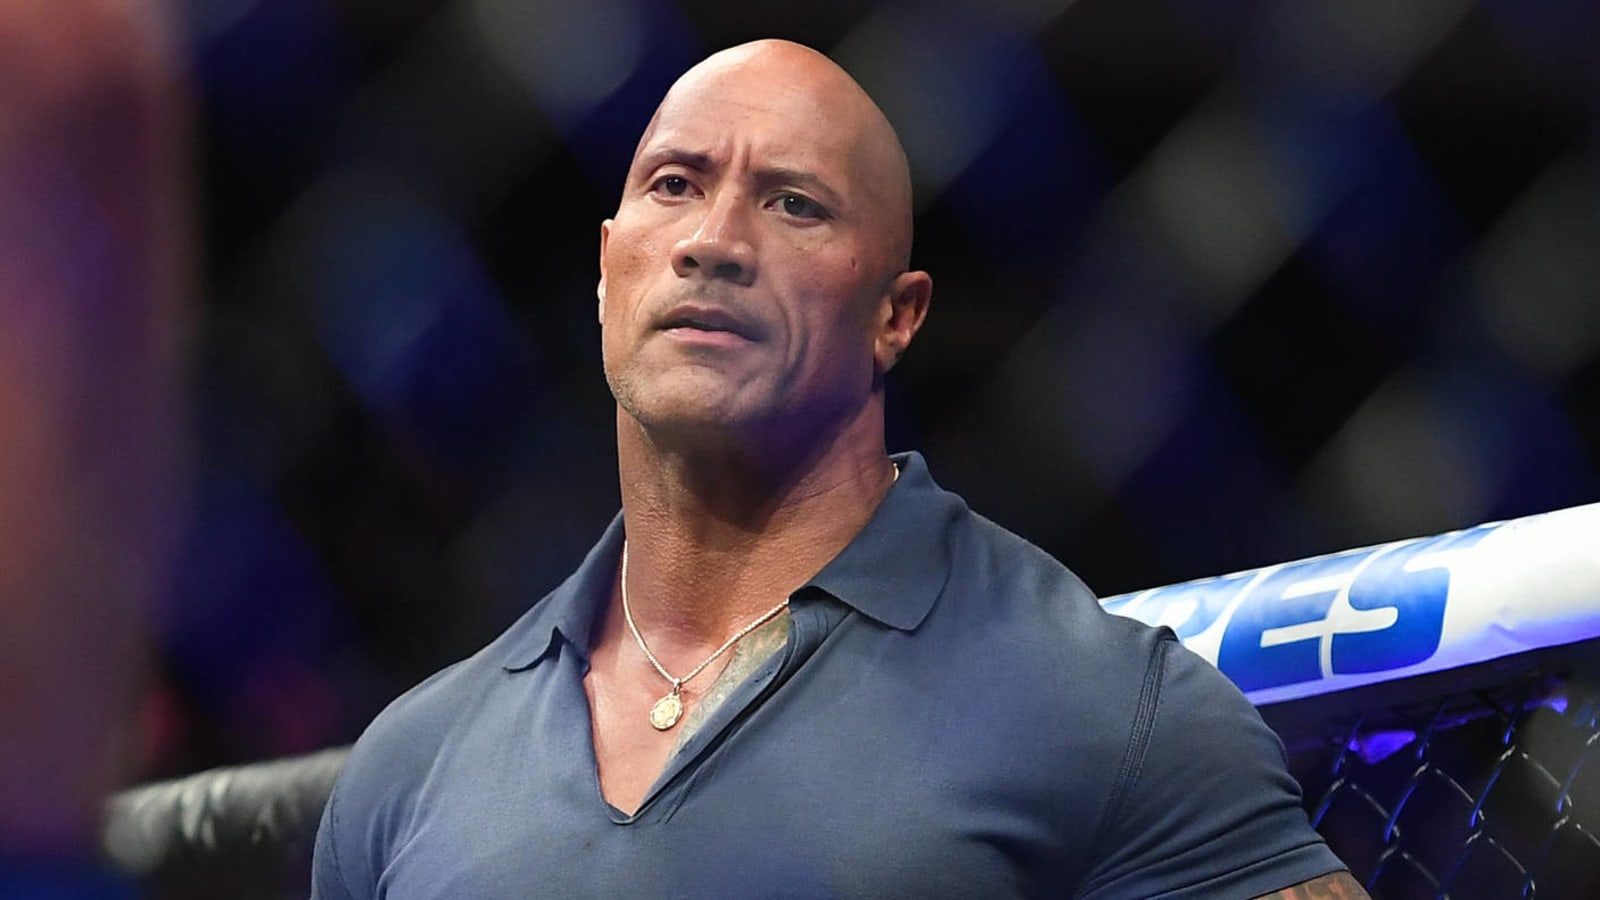 Dwayne 'The Rock' Johnson purchases XFL for $15 million